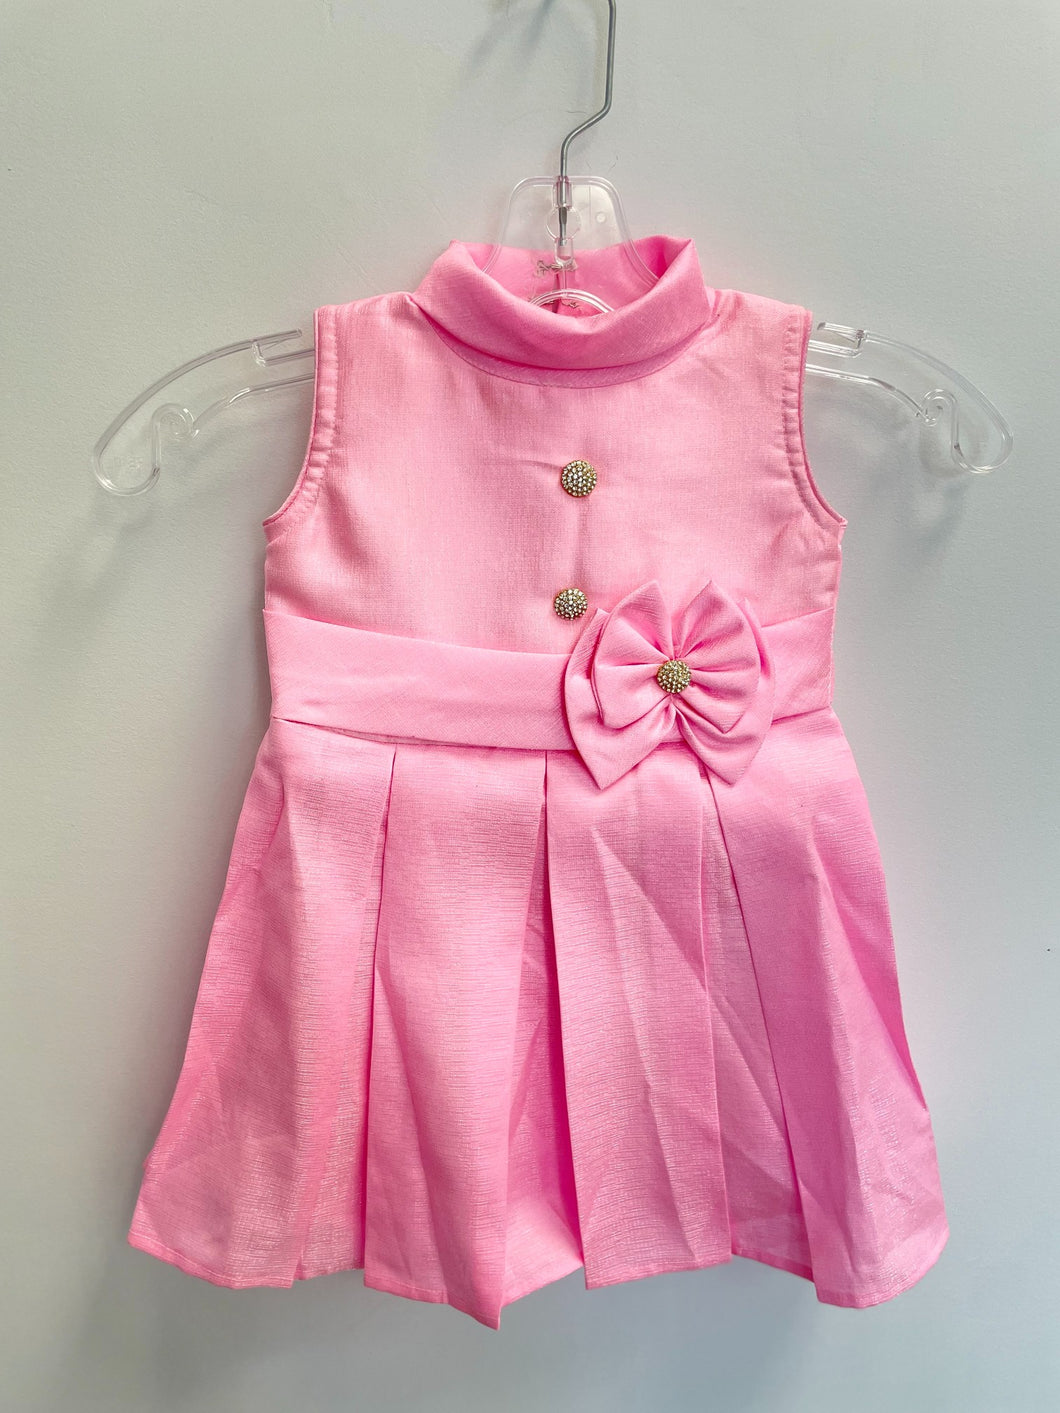 COLLARED NECK KIDS FROCK